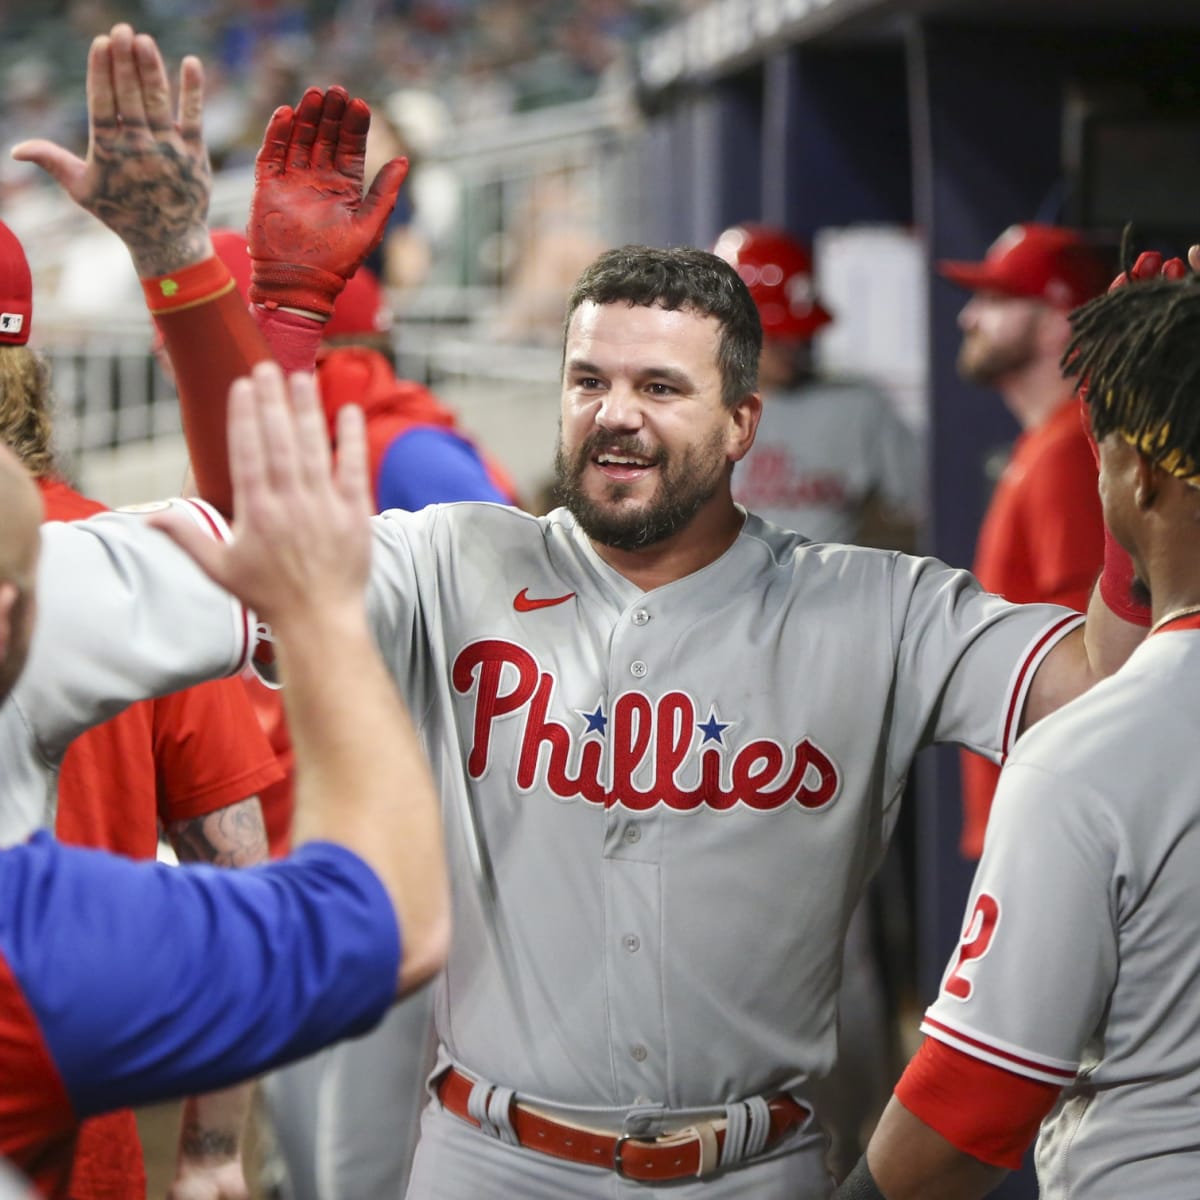 Kyle Schwarber says he'll consider participating in Home Run Derby   Phillies Nation - Your source for Philadelphia Phillies news, opinion,  history, rumors, events, and other fun stuff.